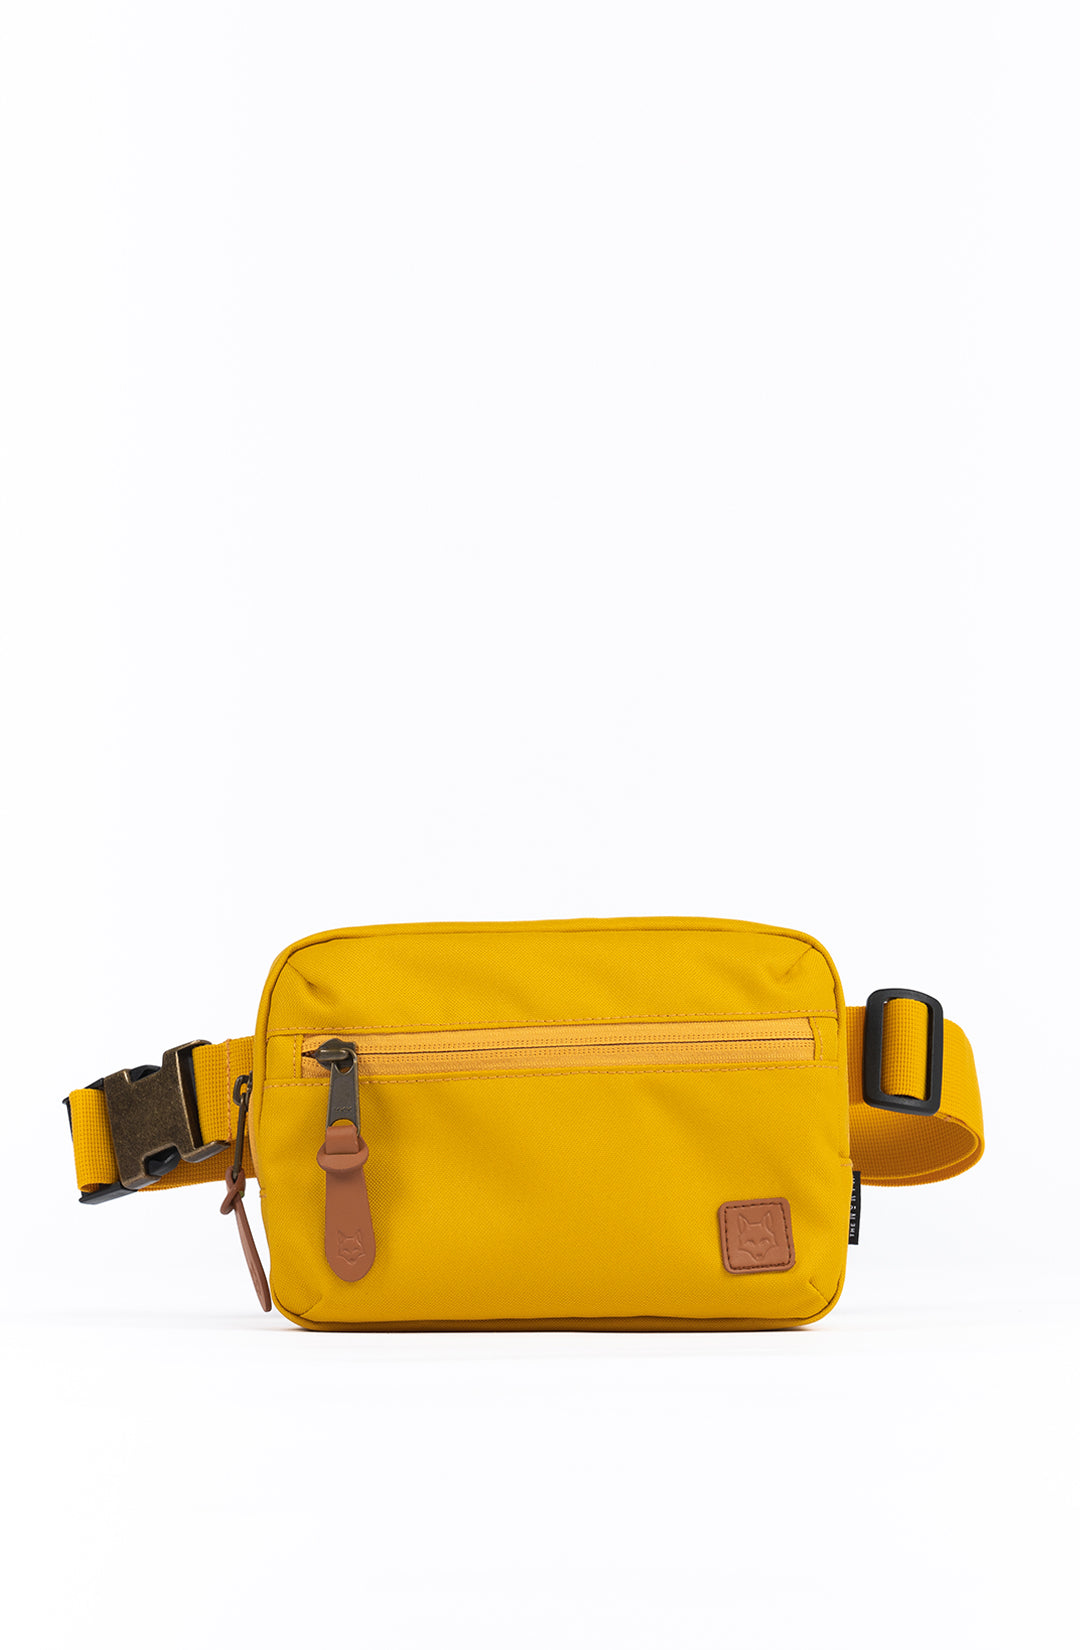 Product of The North Store Hip Pack (Saffron)